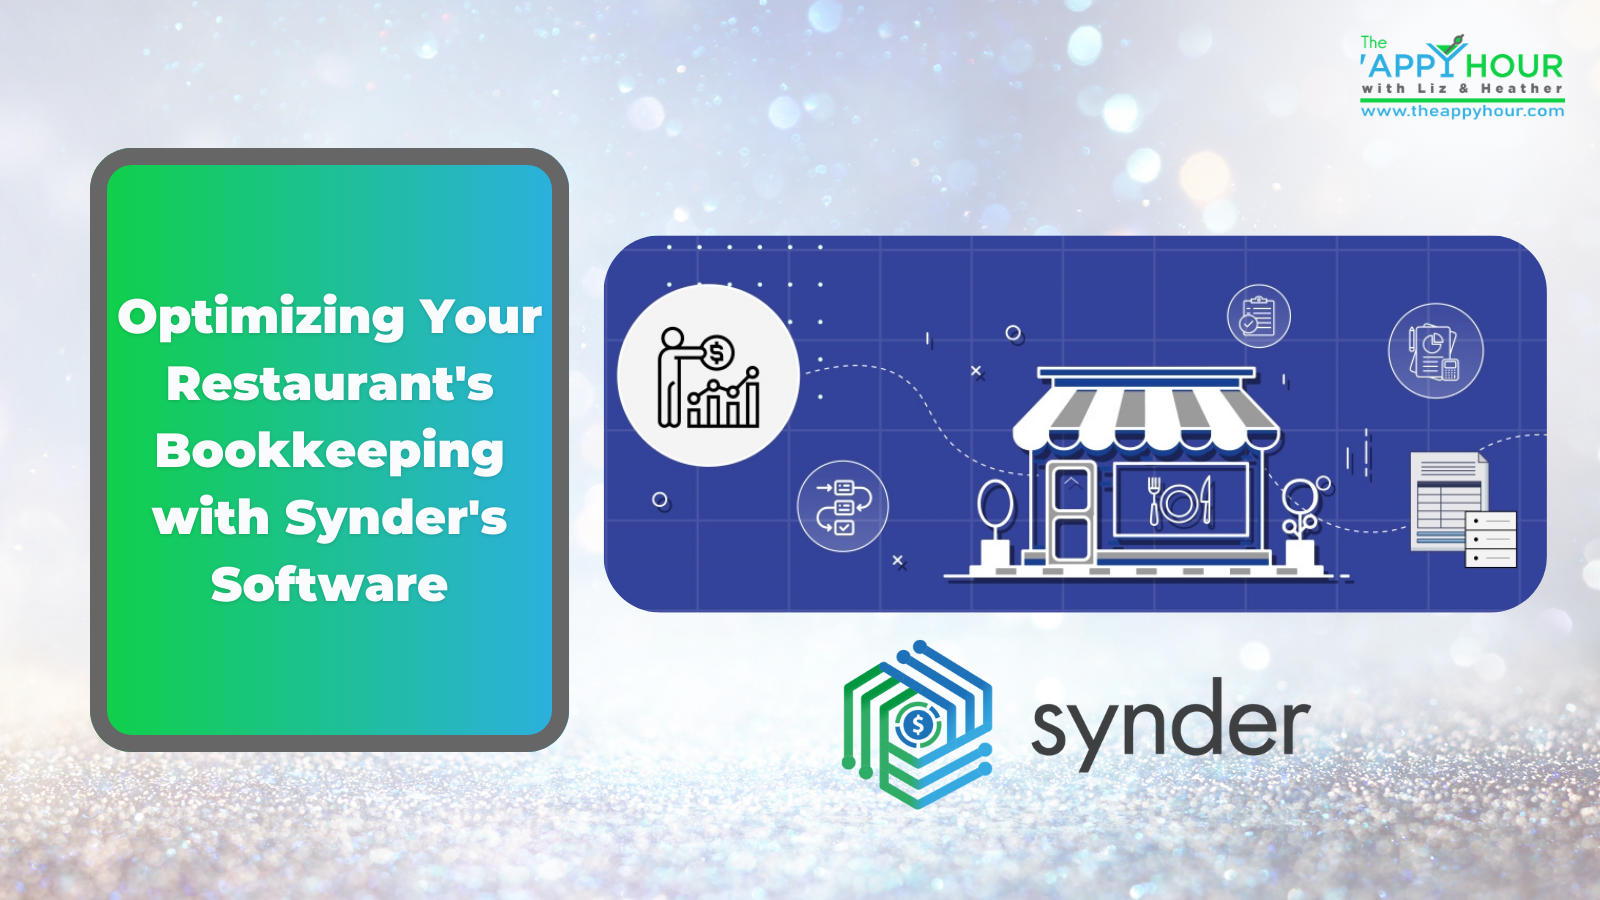 Optimizing Your Restaurant’s Bookkeeping with Synder’s Software